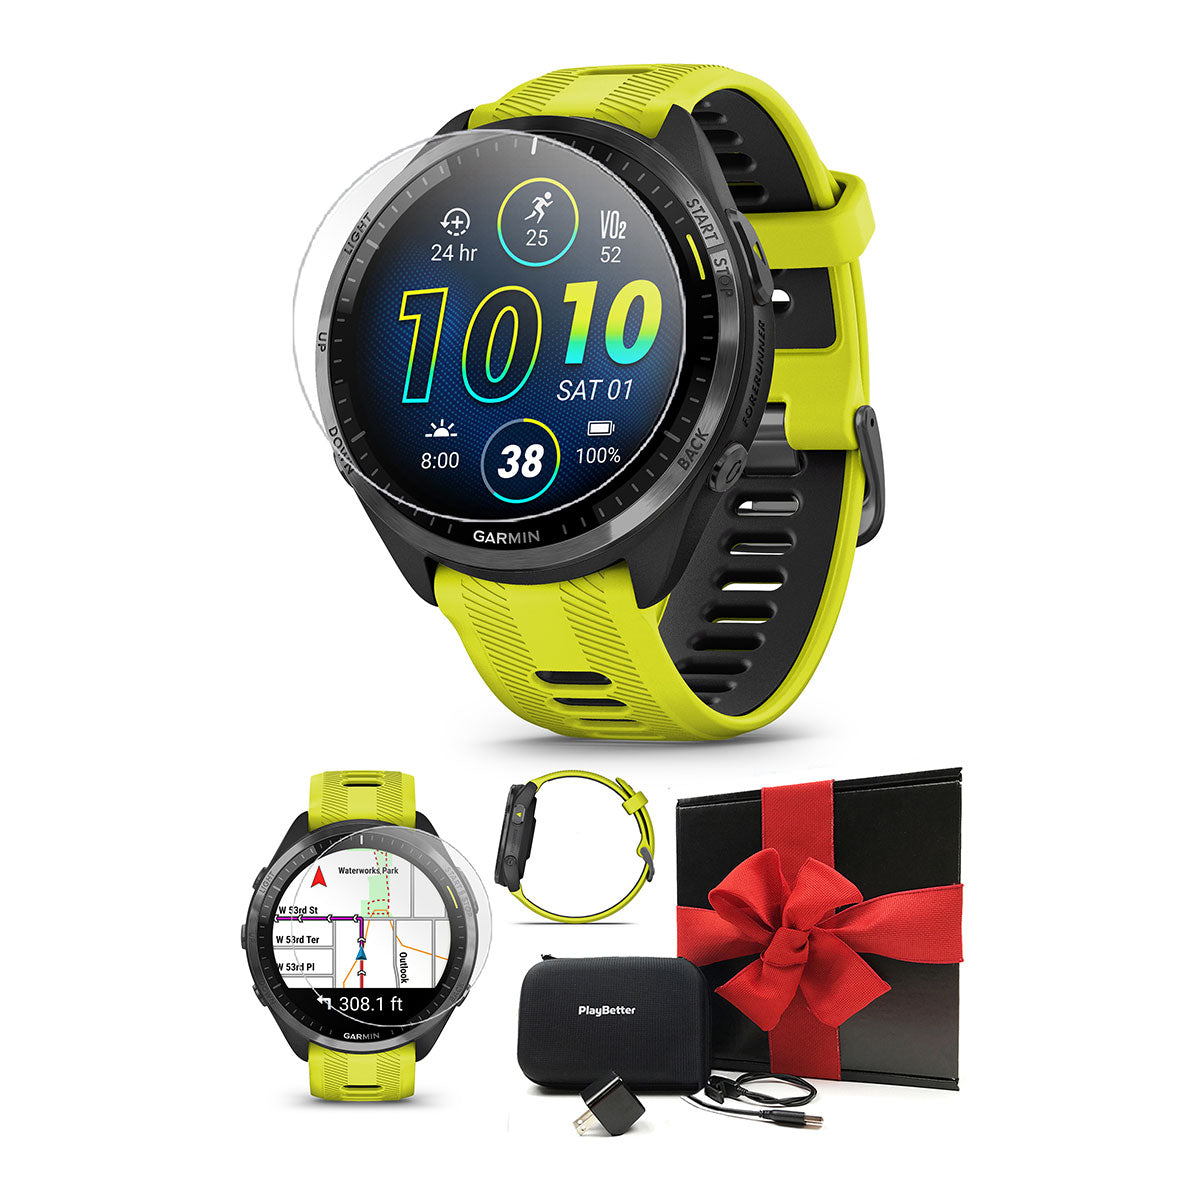 Garmin Forerunner 965 (Amp Yellow/Black) Premium Running GPS Smartwatch | Gift Box with PlayBetter HD Screen Protectors, Wall Adapter & Case - image 1 of 7